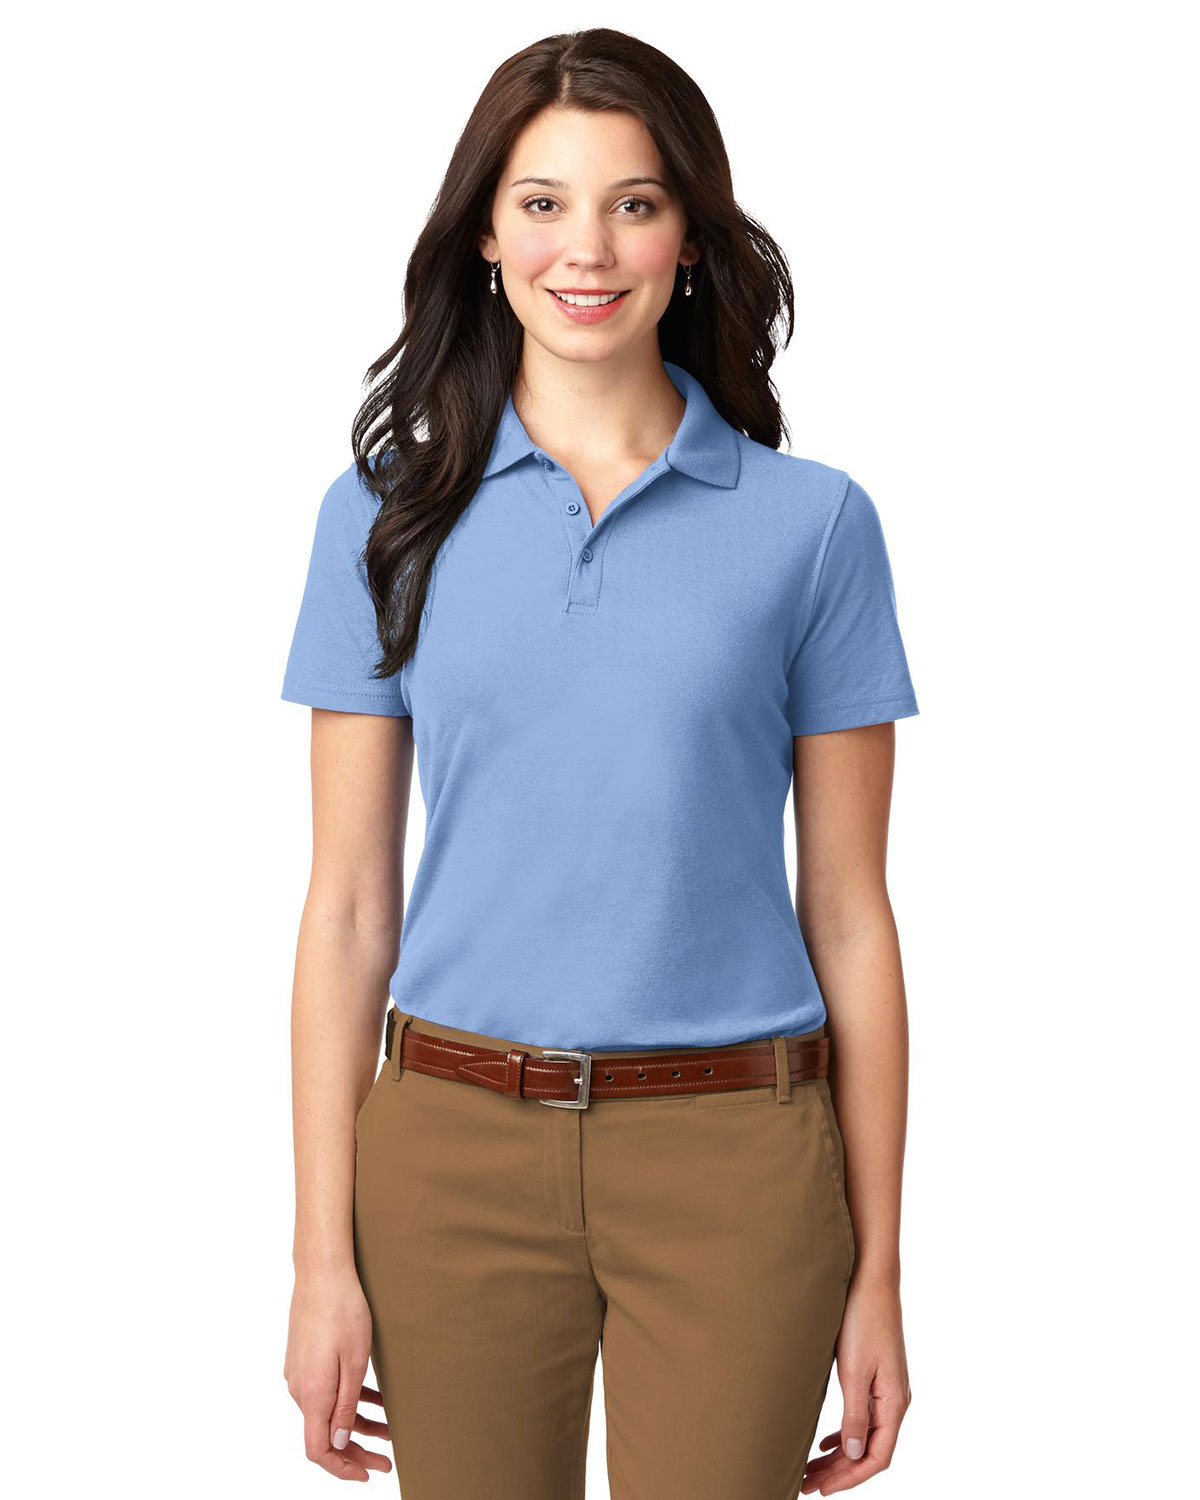 Port Authority L510 Women Stain-Resistant Polo at Apparelstation